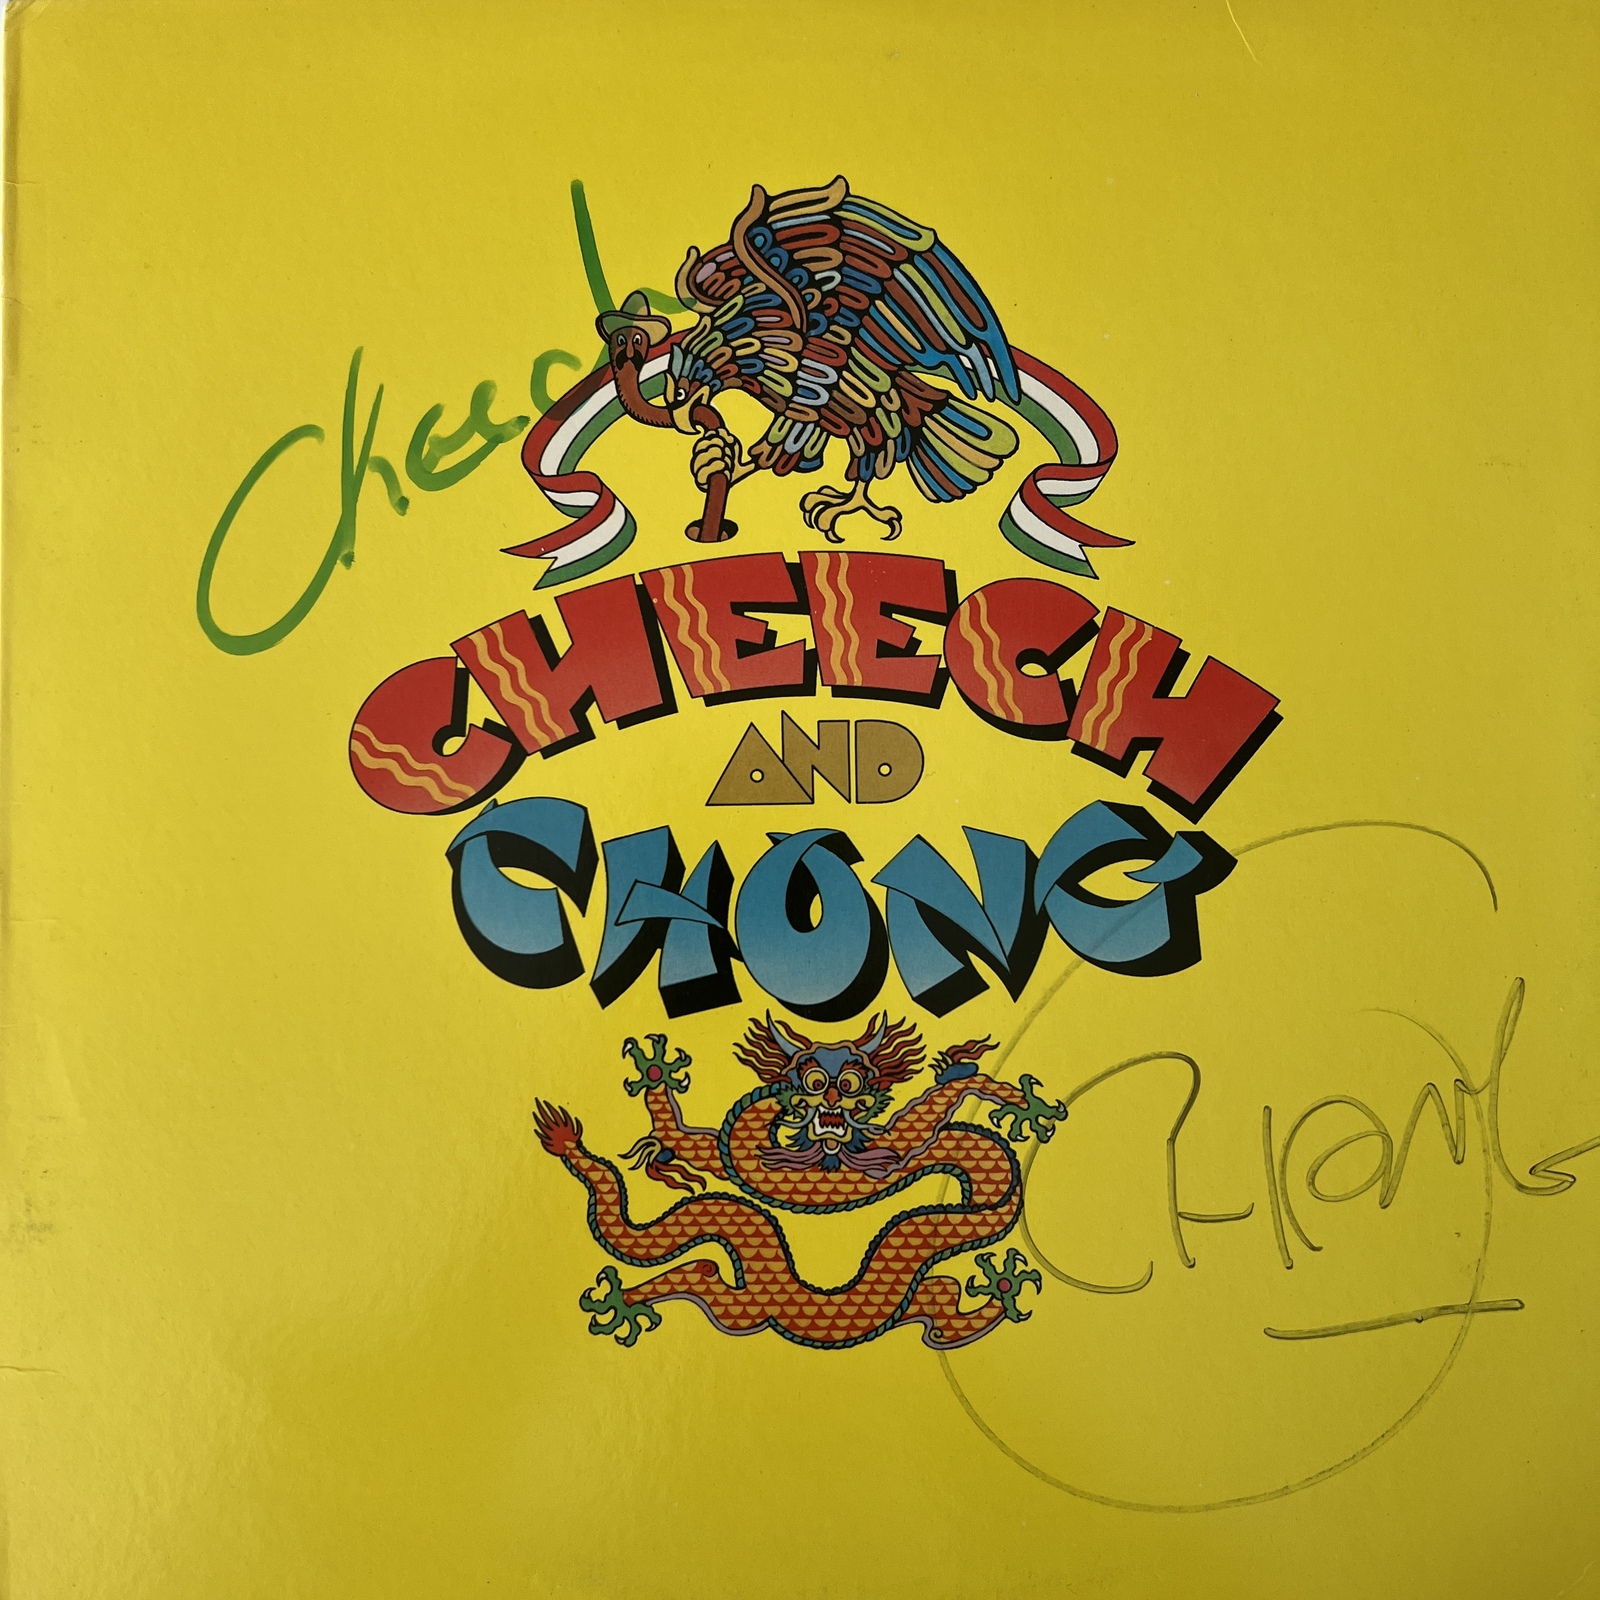 Primary image for Cheech and Chong signed album